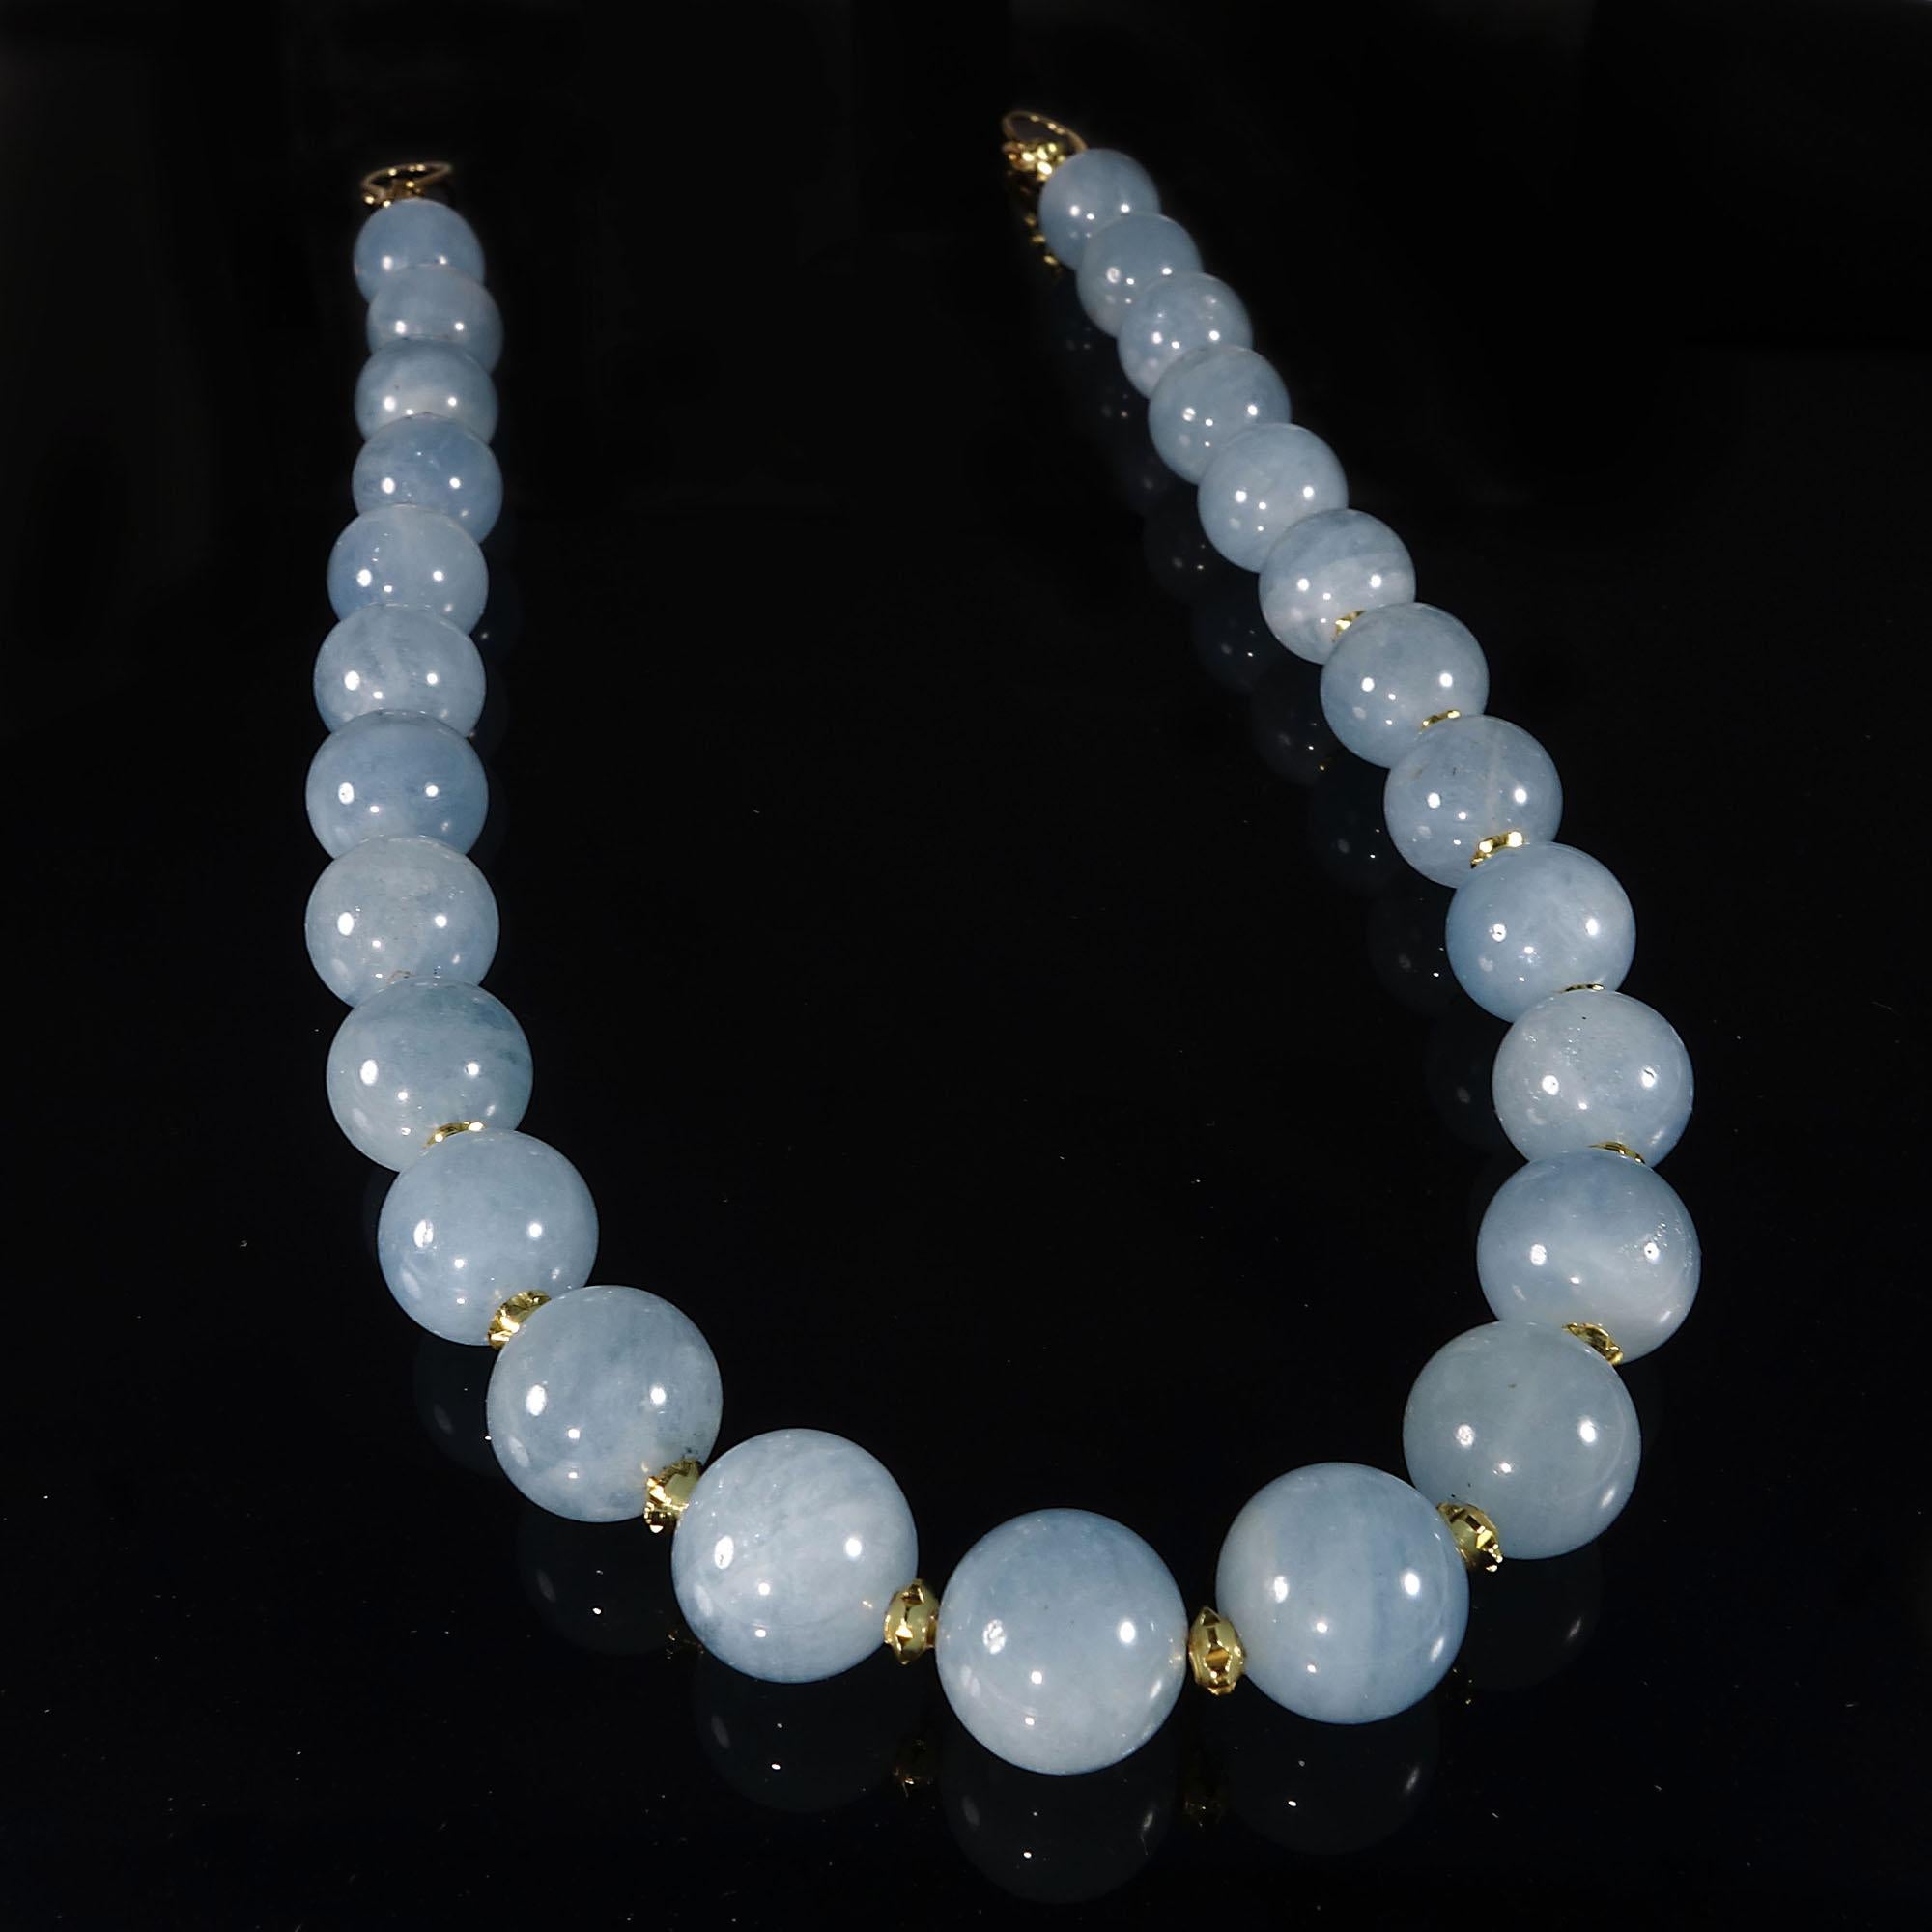 Gemjunky Translucent Aquamarine Choker Necklace with Gold Accents 4